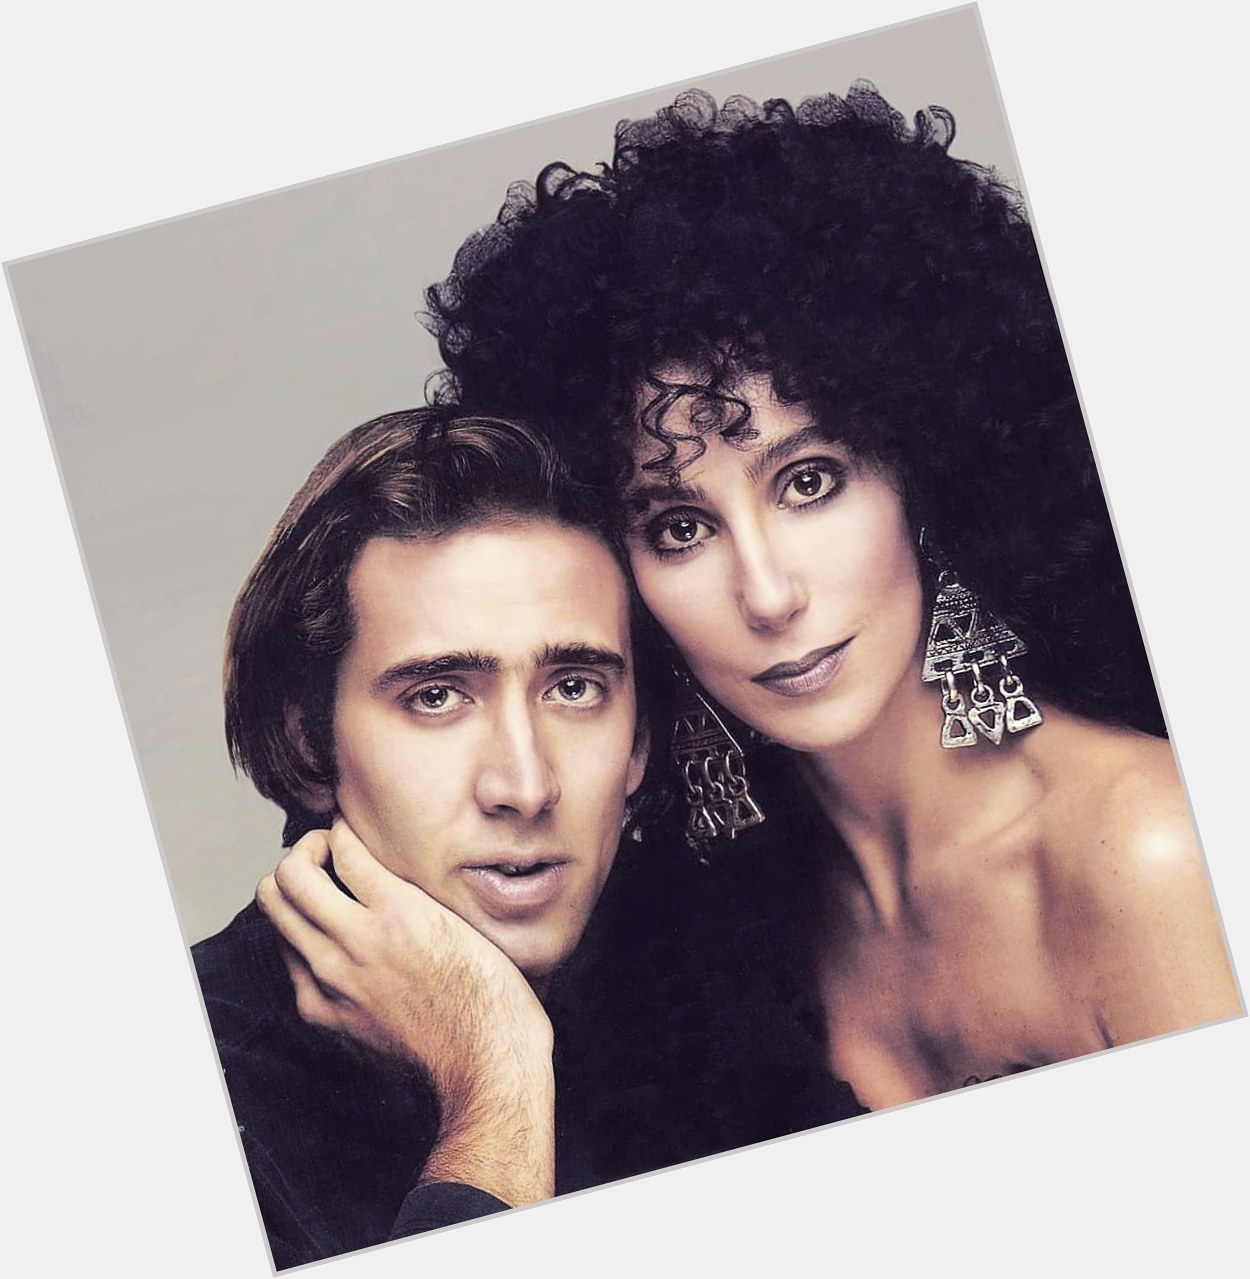 Happy (late) birthday to \"Moonstruck\" co-star Nicolas Cage, who turned 57 yesterday. by MGM Album 